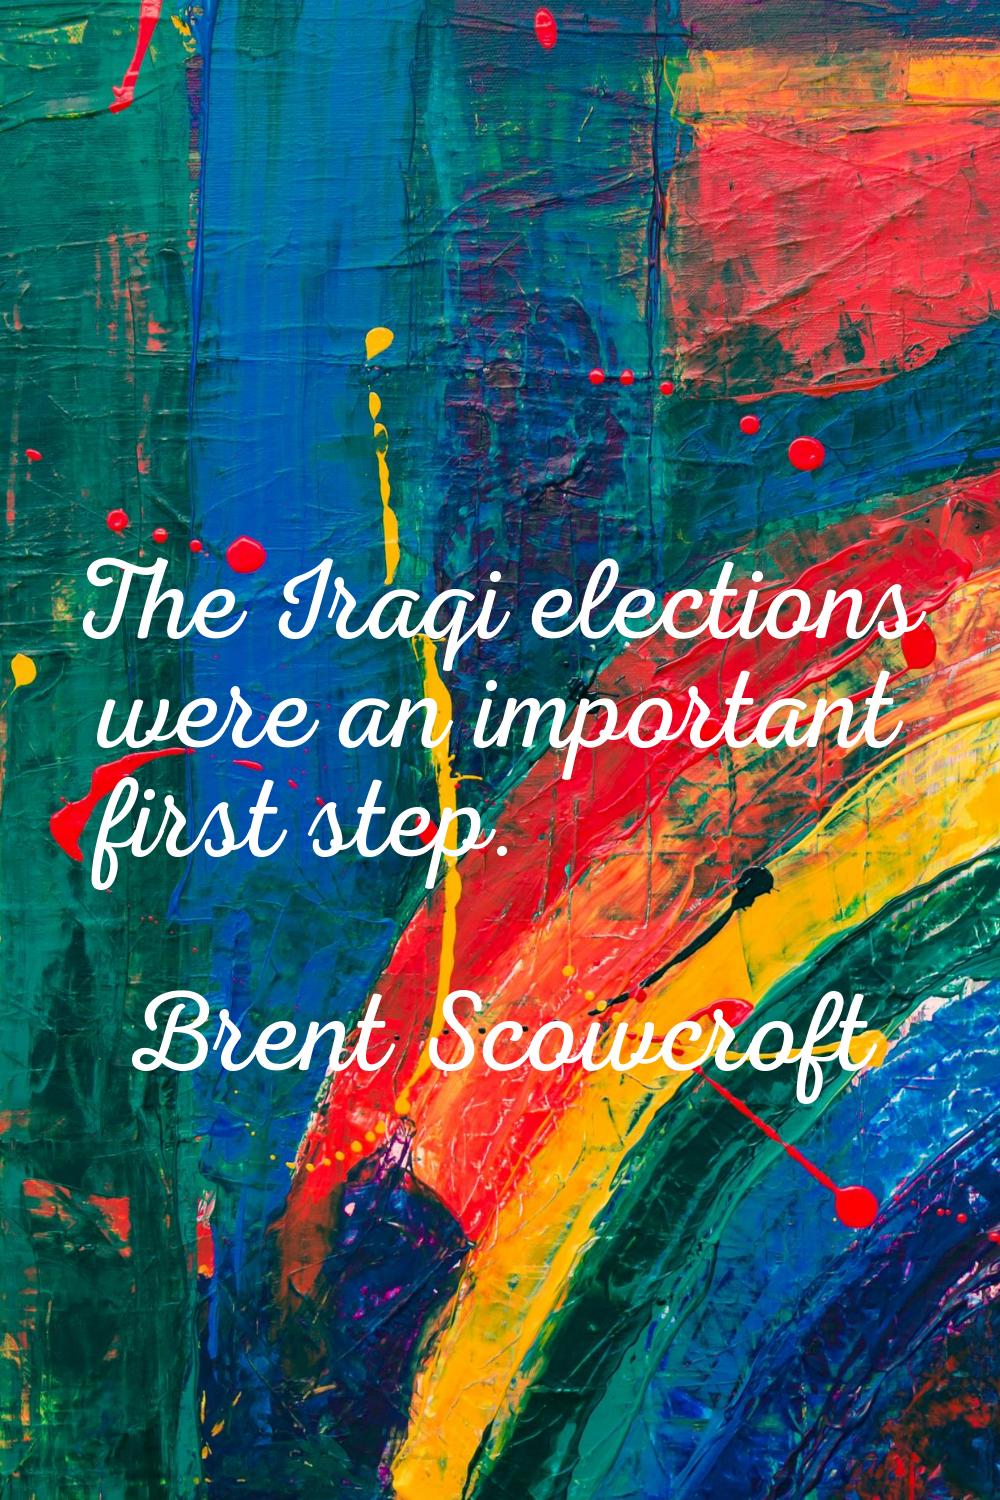 The Iraqi elections were an important first step.